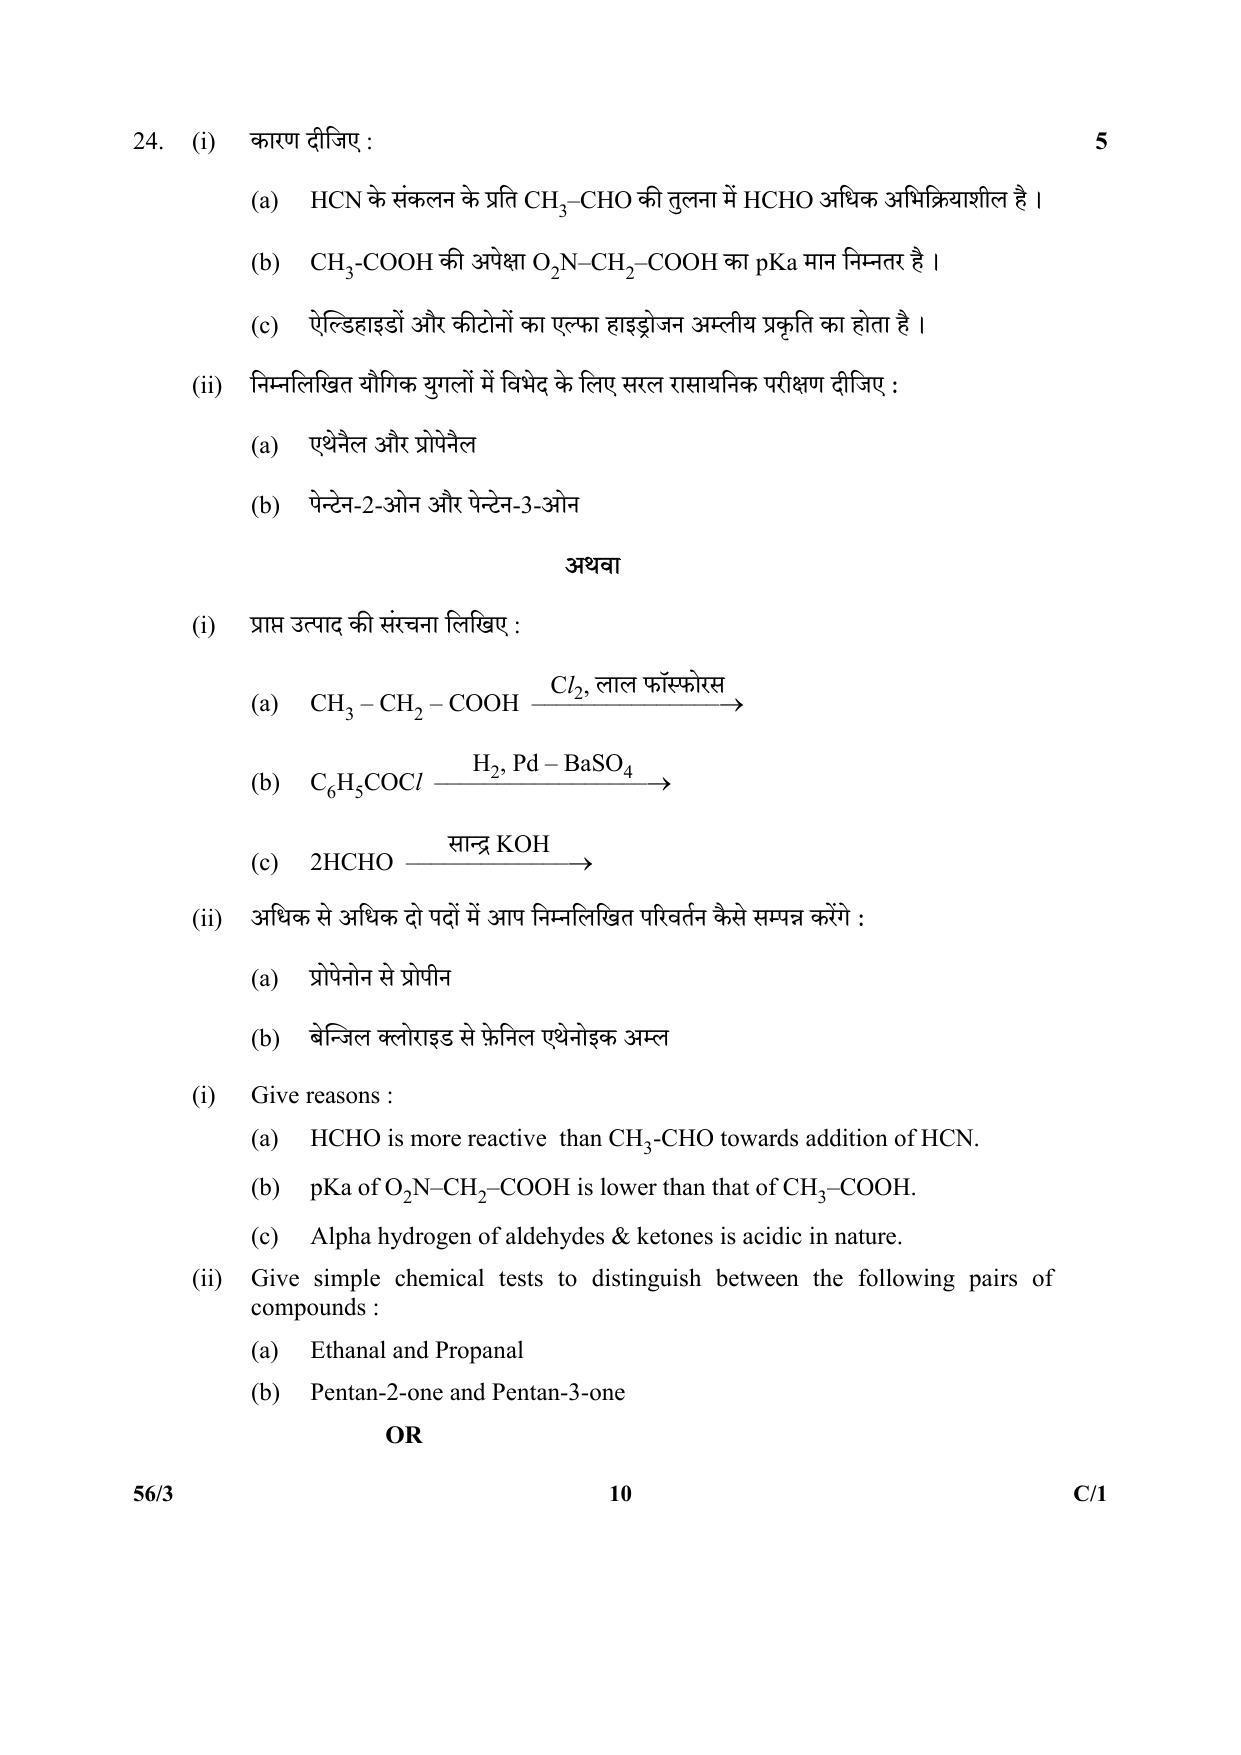 CBSE Class 12 56-3 (Chemistry) 2018 Compartment Question Paper - Page 10